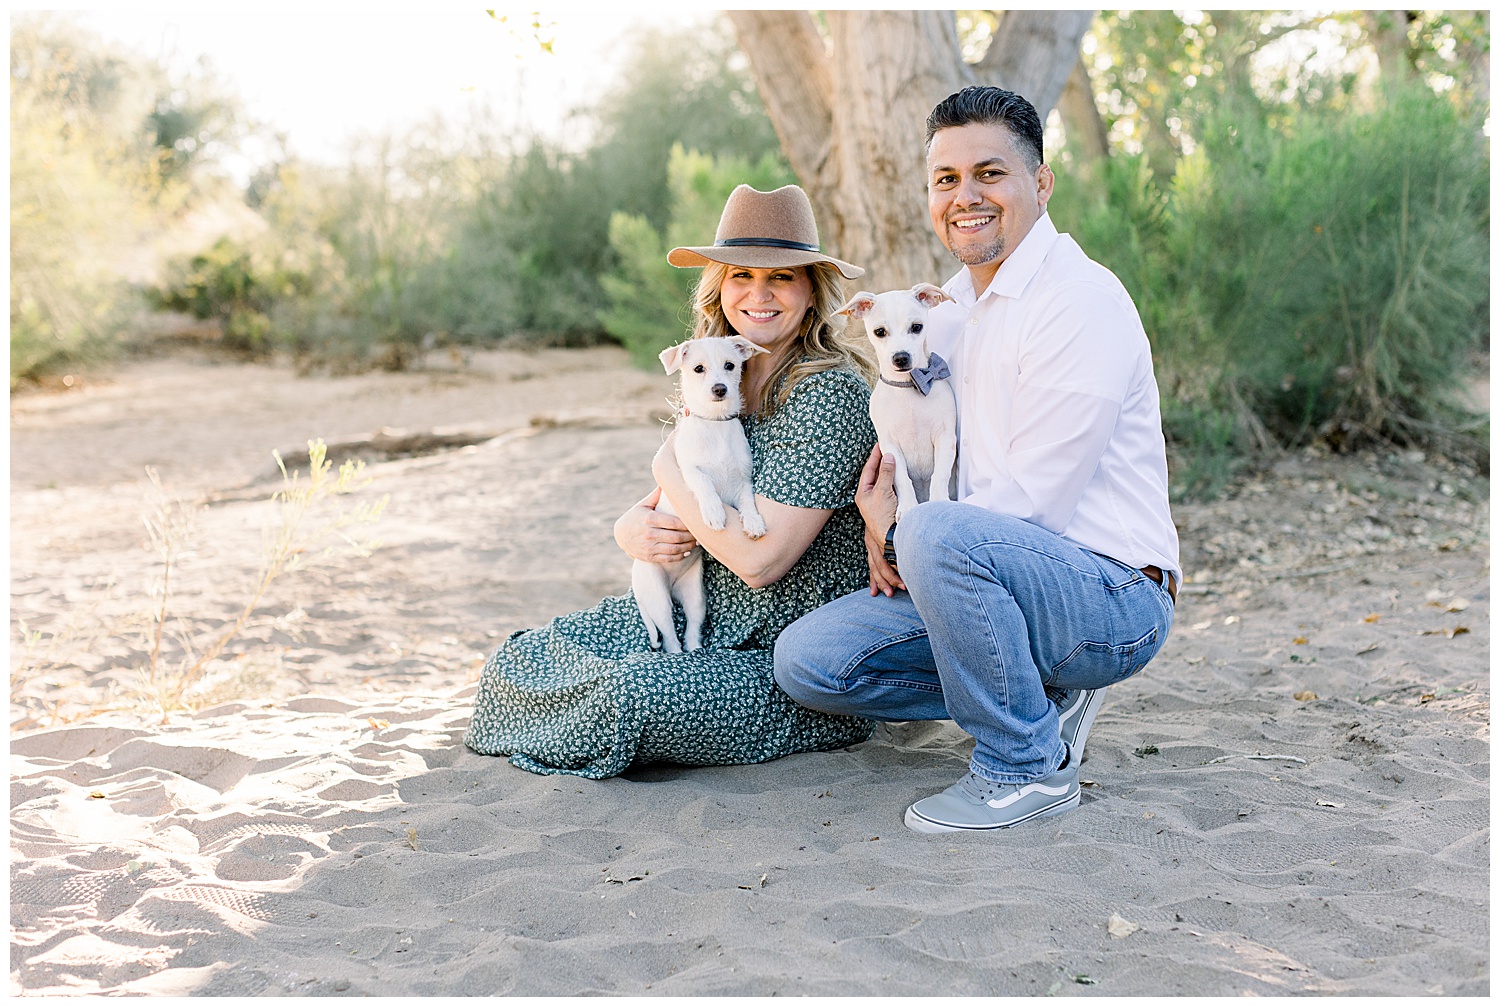 Arizona spring session, couples session with puppies and love